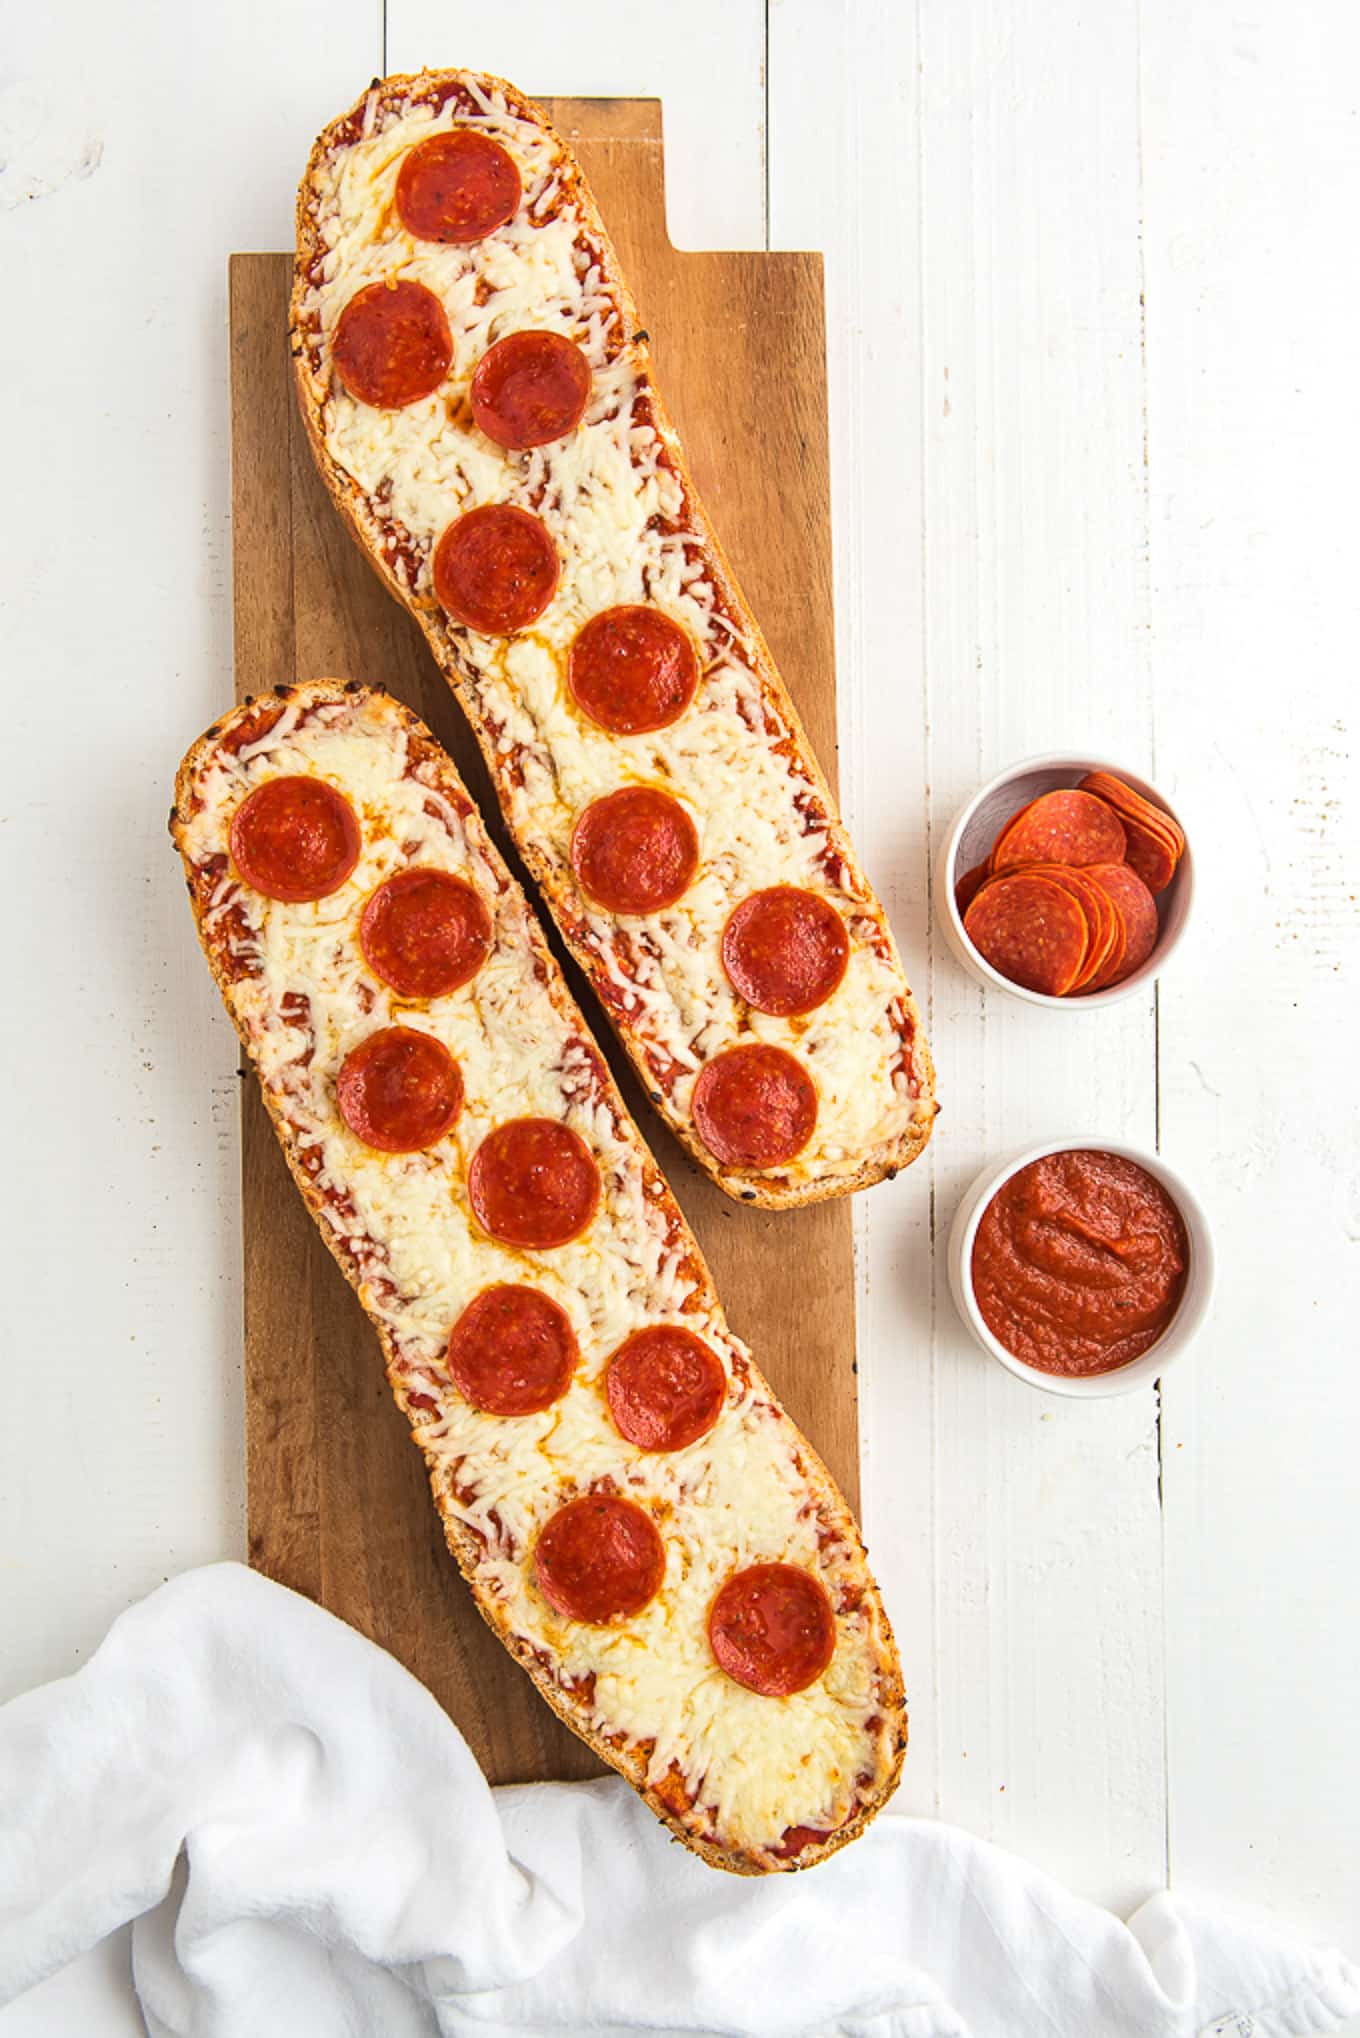 Cooked french bread halves with pizza toppings.